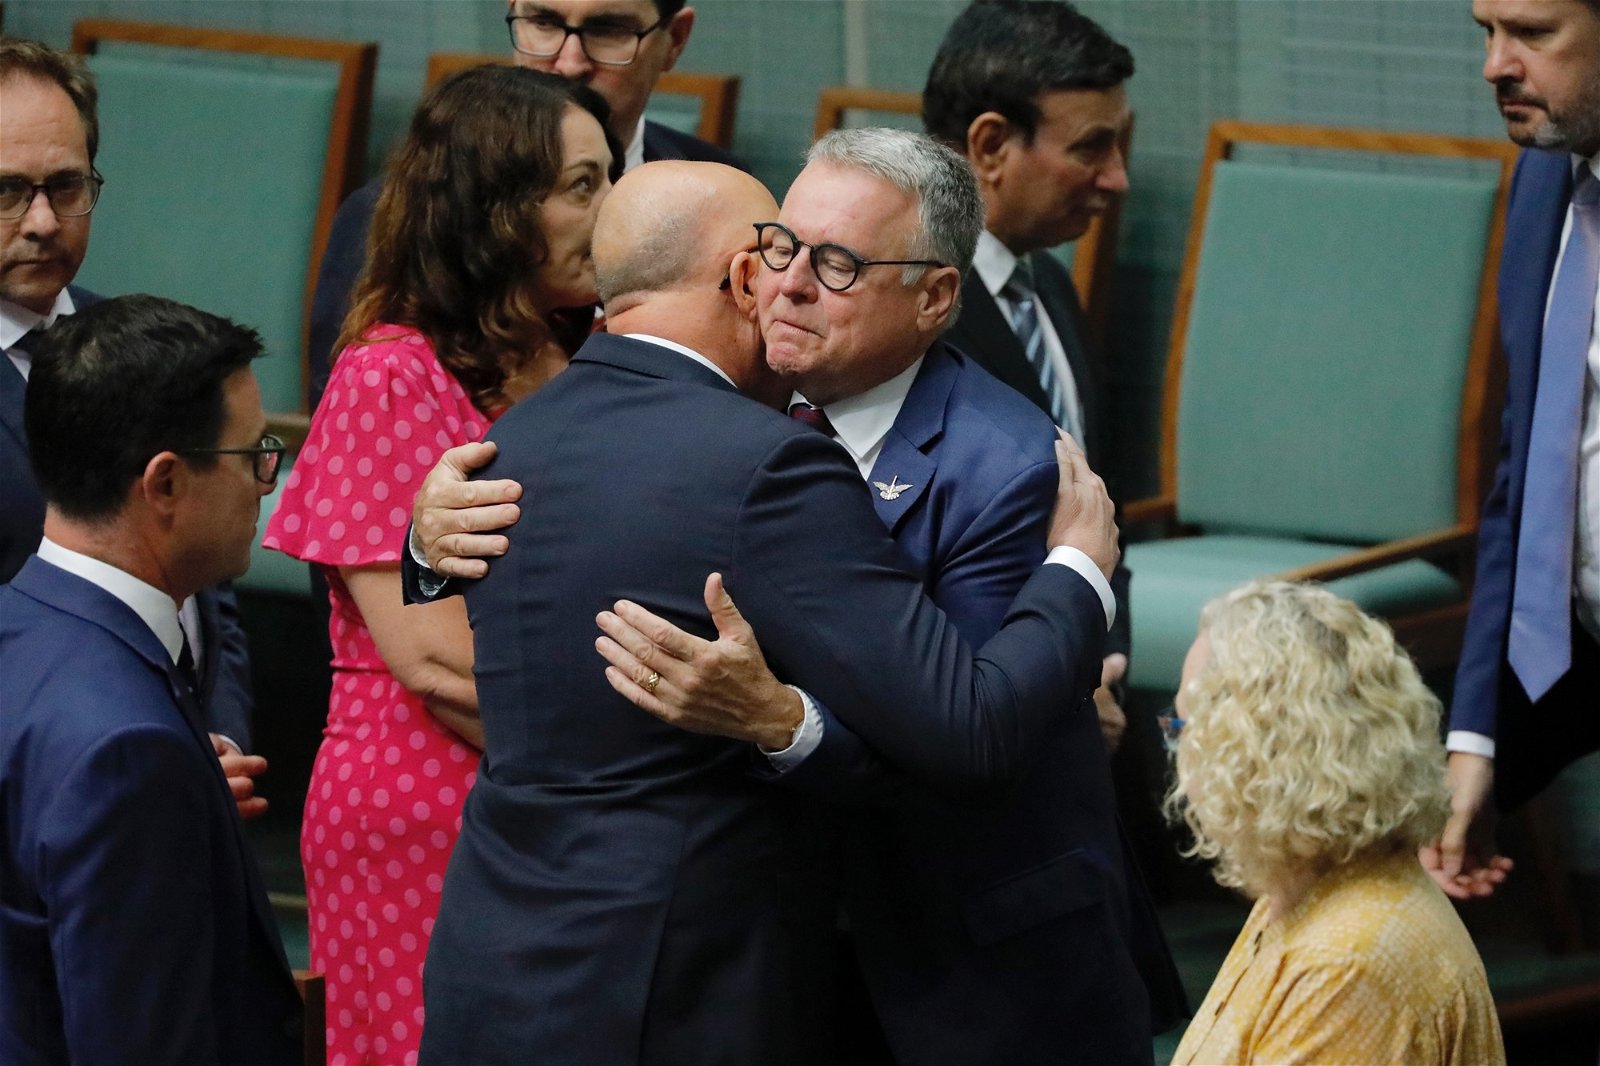 Peter Dutton hugging a man in glasses. 